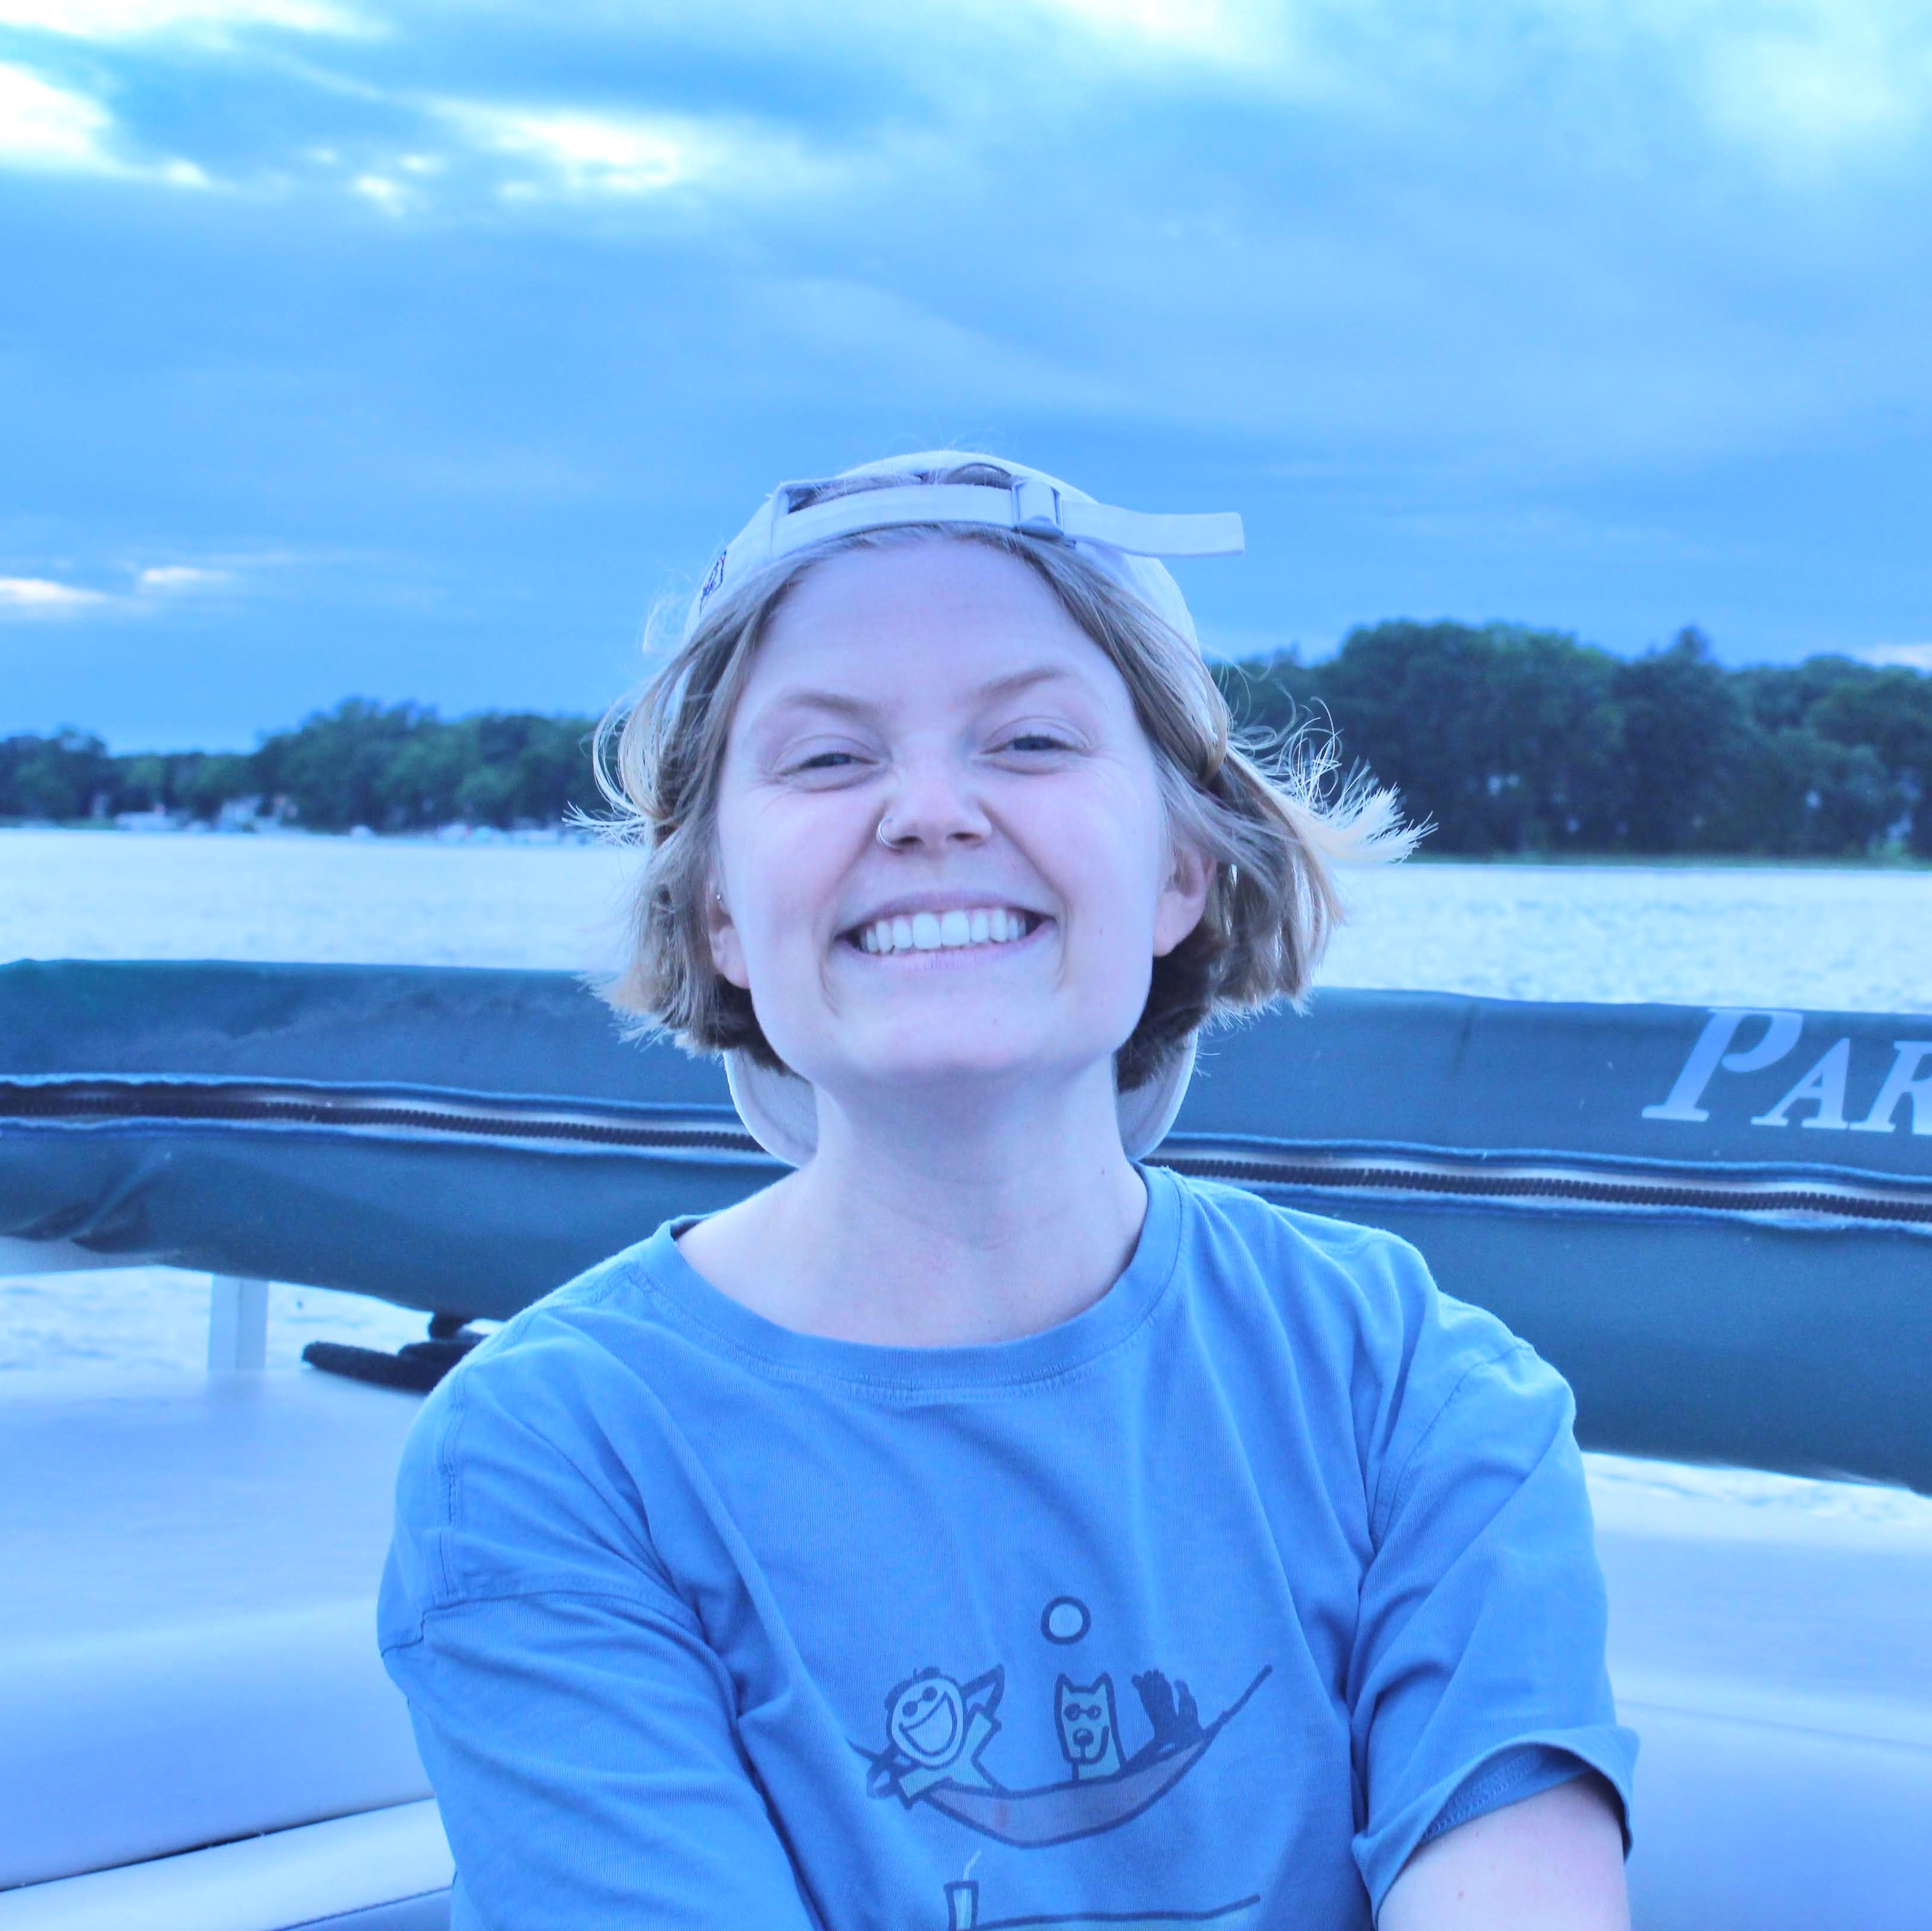 Smiling girl on a boat in a blue shirt 